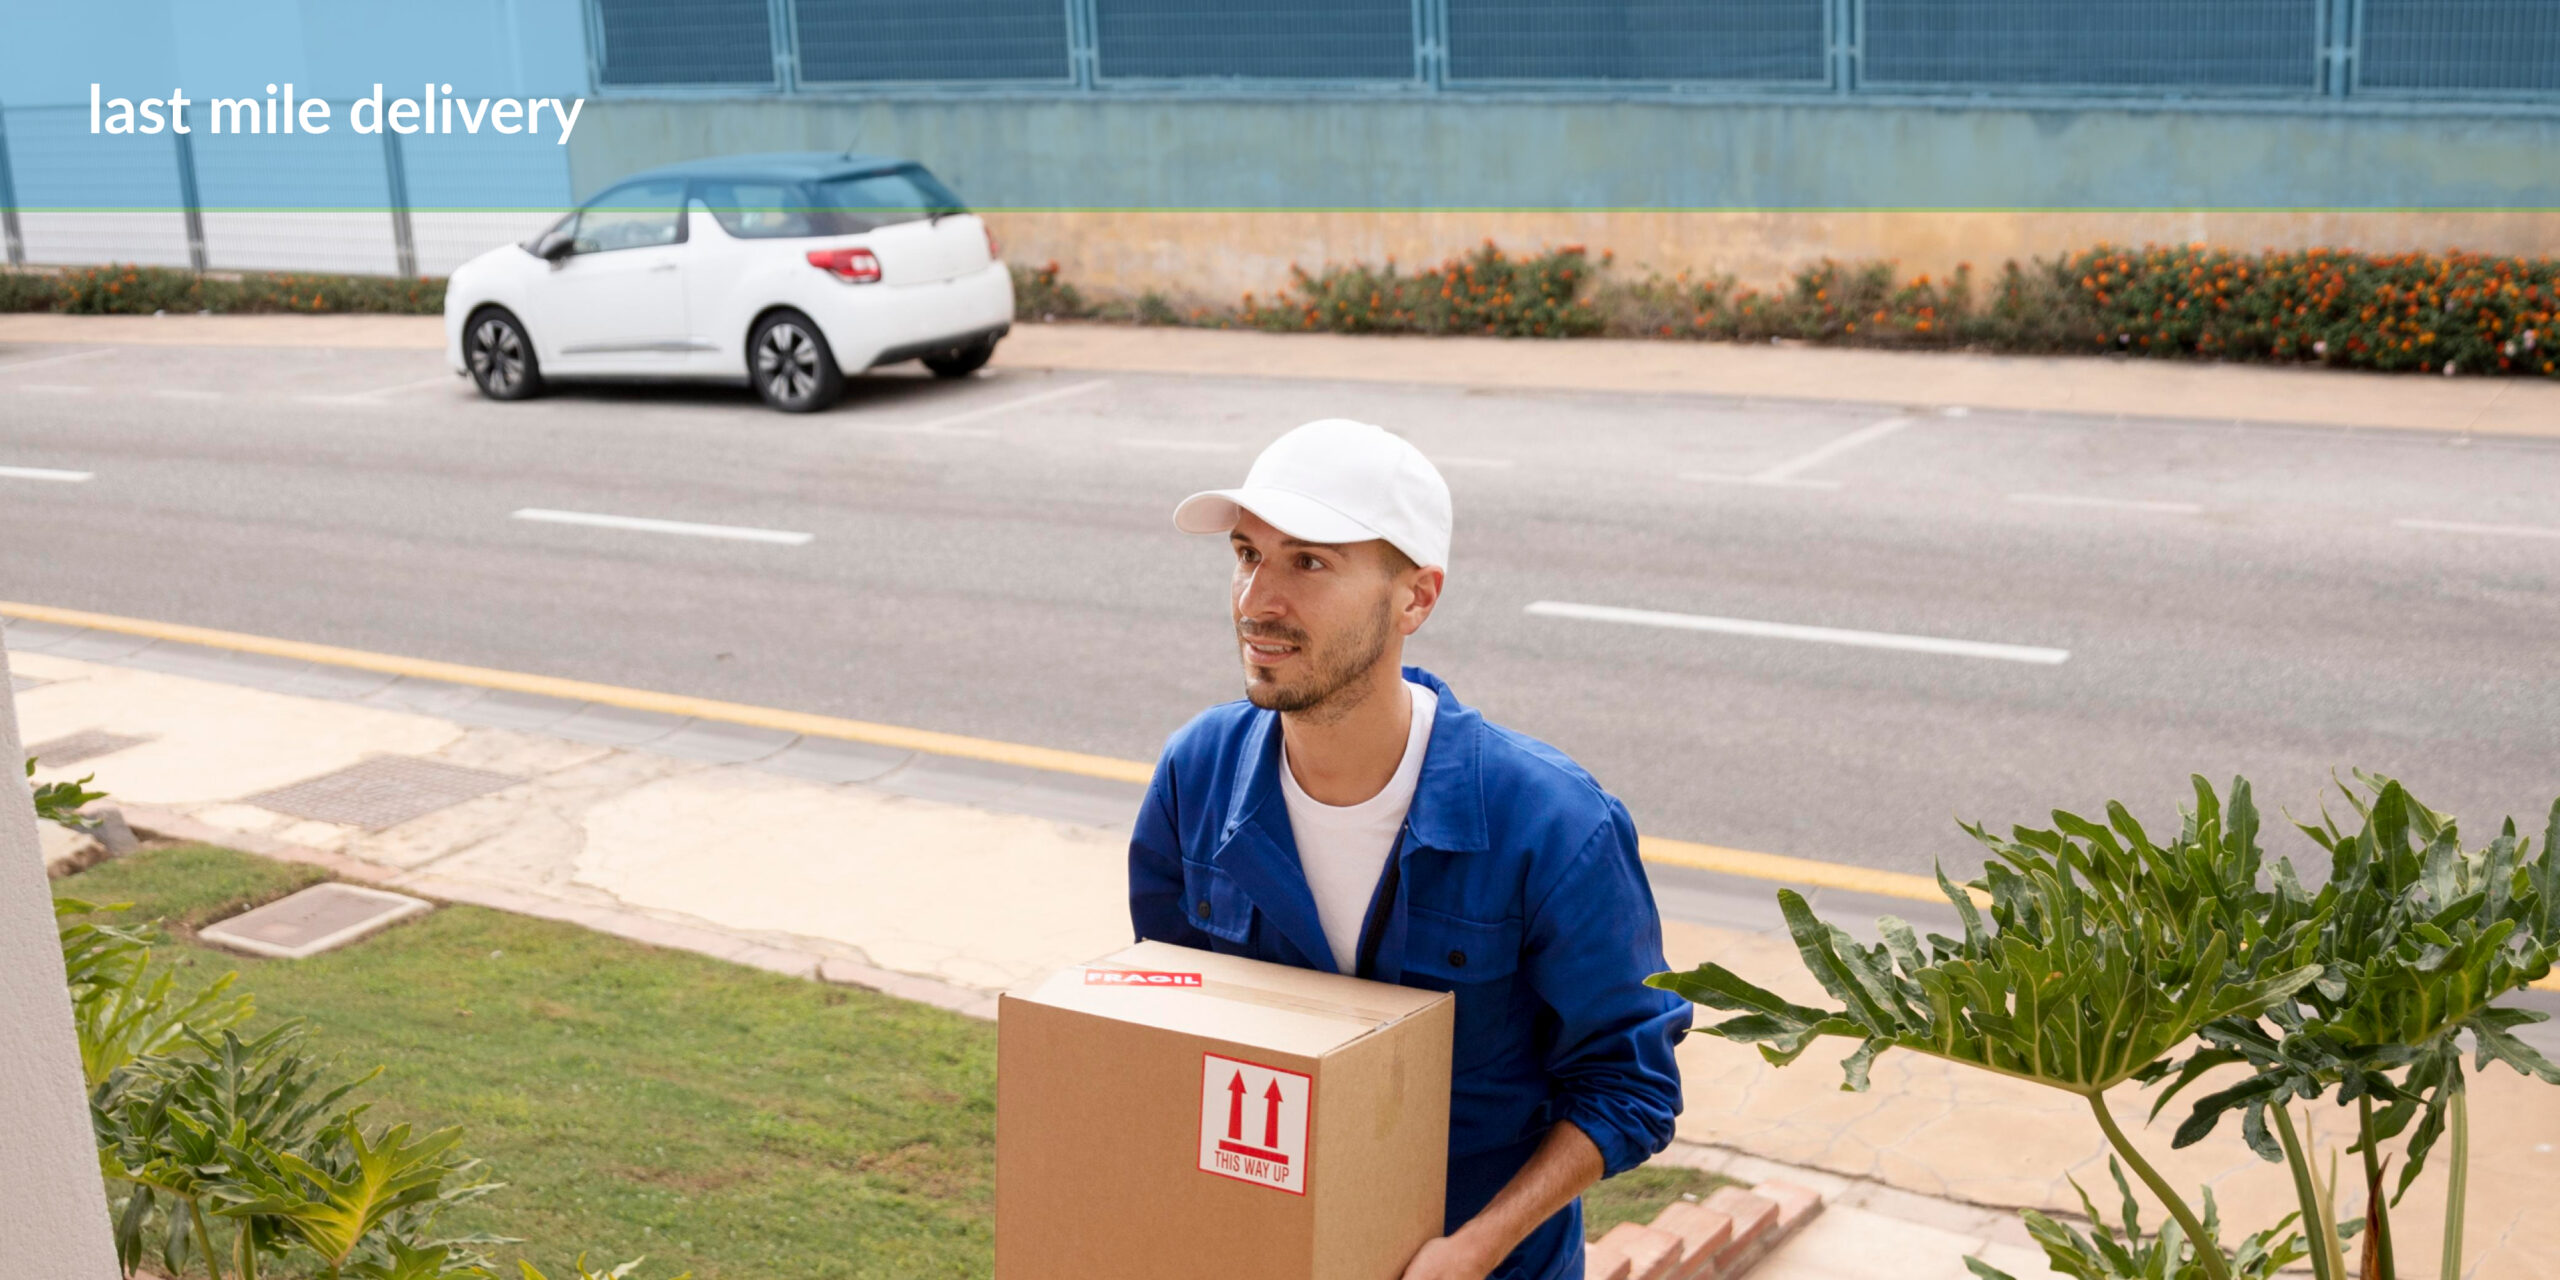 A delivery person in a blue uniform and white cap holding a cardboard box with a "This way up" sticker standing on the sidewalk next to a road with a white car passing by, with text "last mile delivery" in the upper left corner. Greenery is visible in the foreground and background.